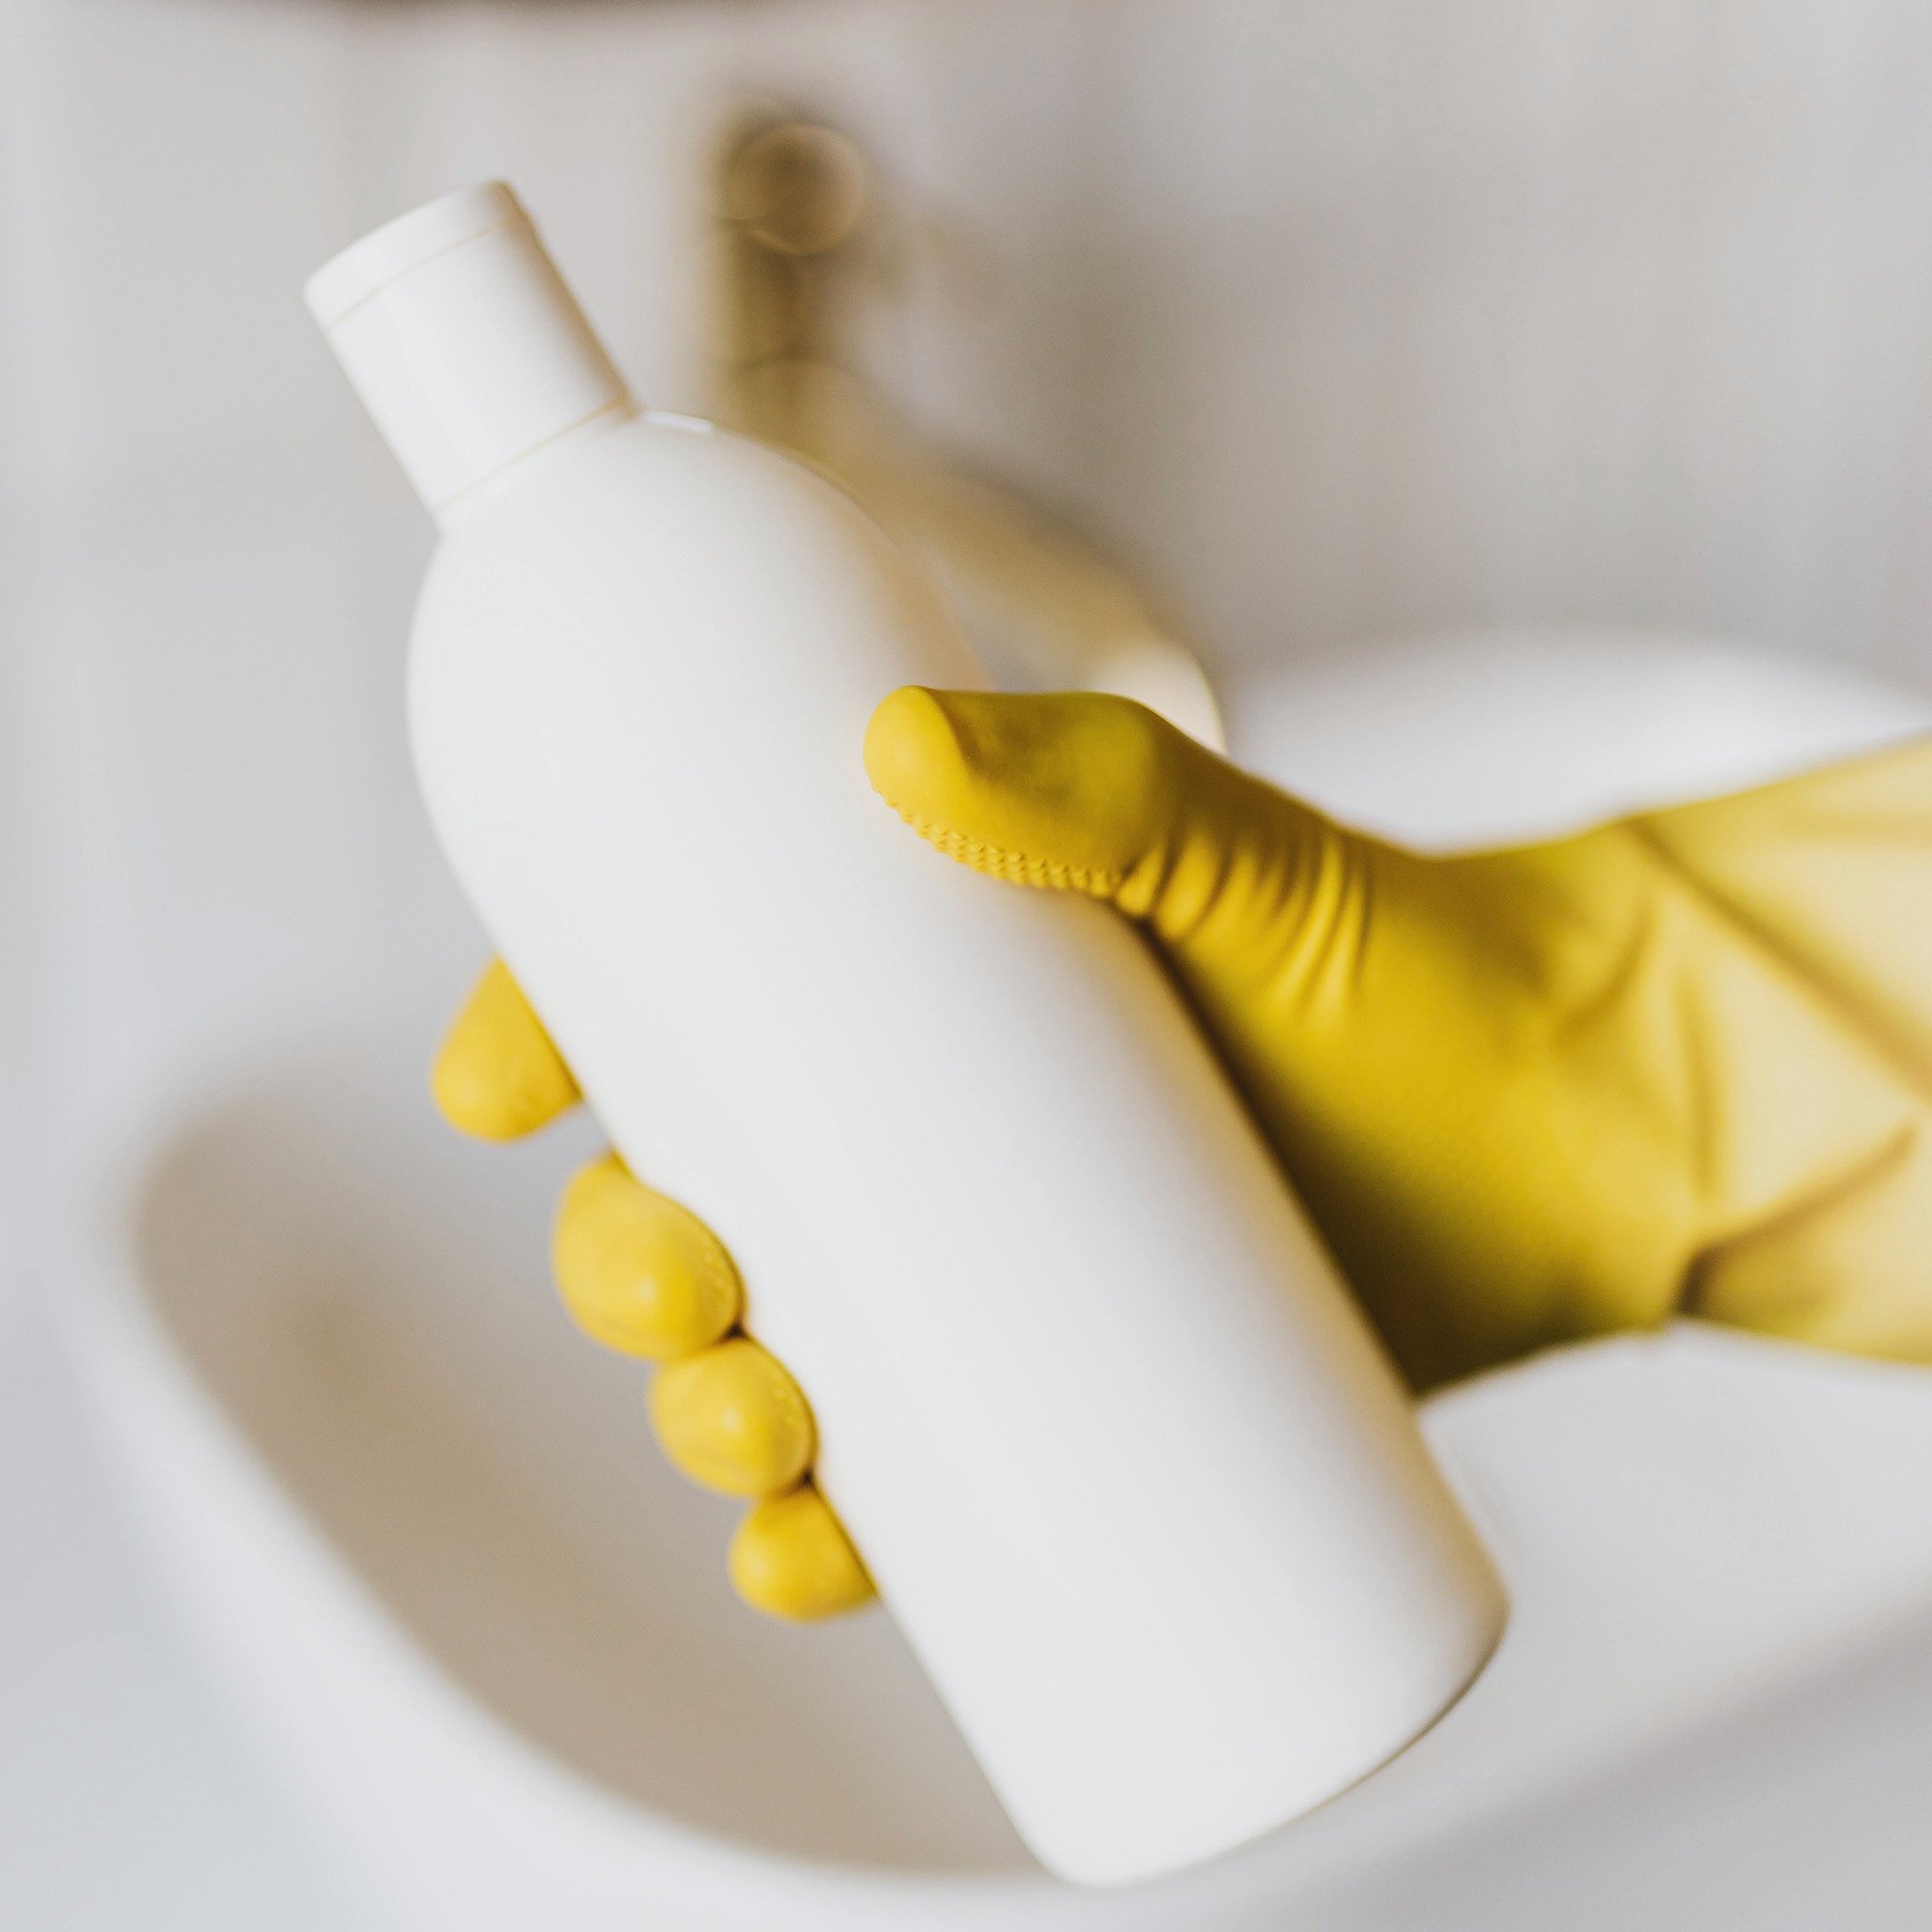 Recycled Beauty Packaging: A Gloved Hand Holding a Plastic Bottle